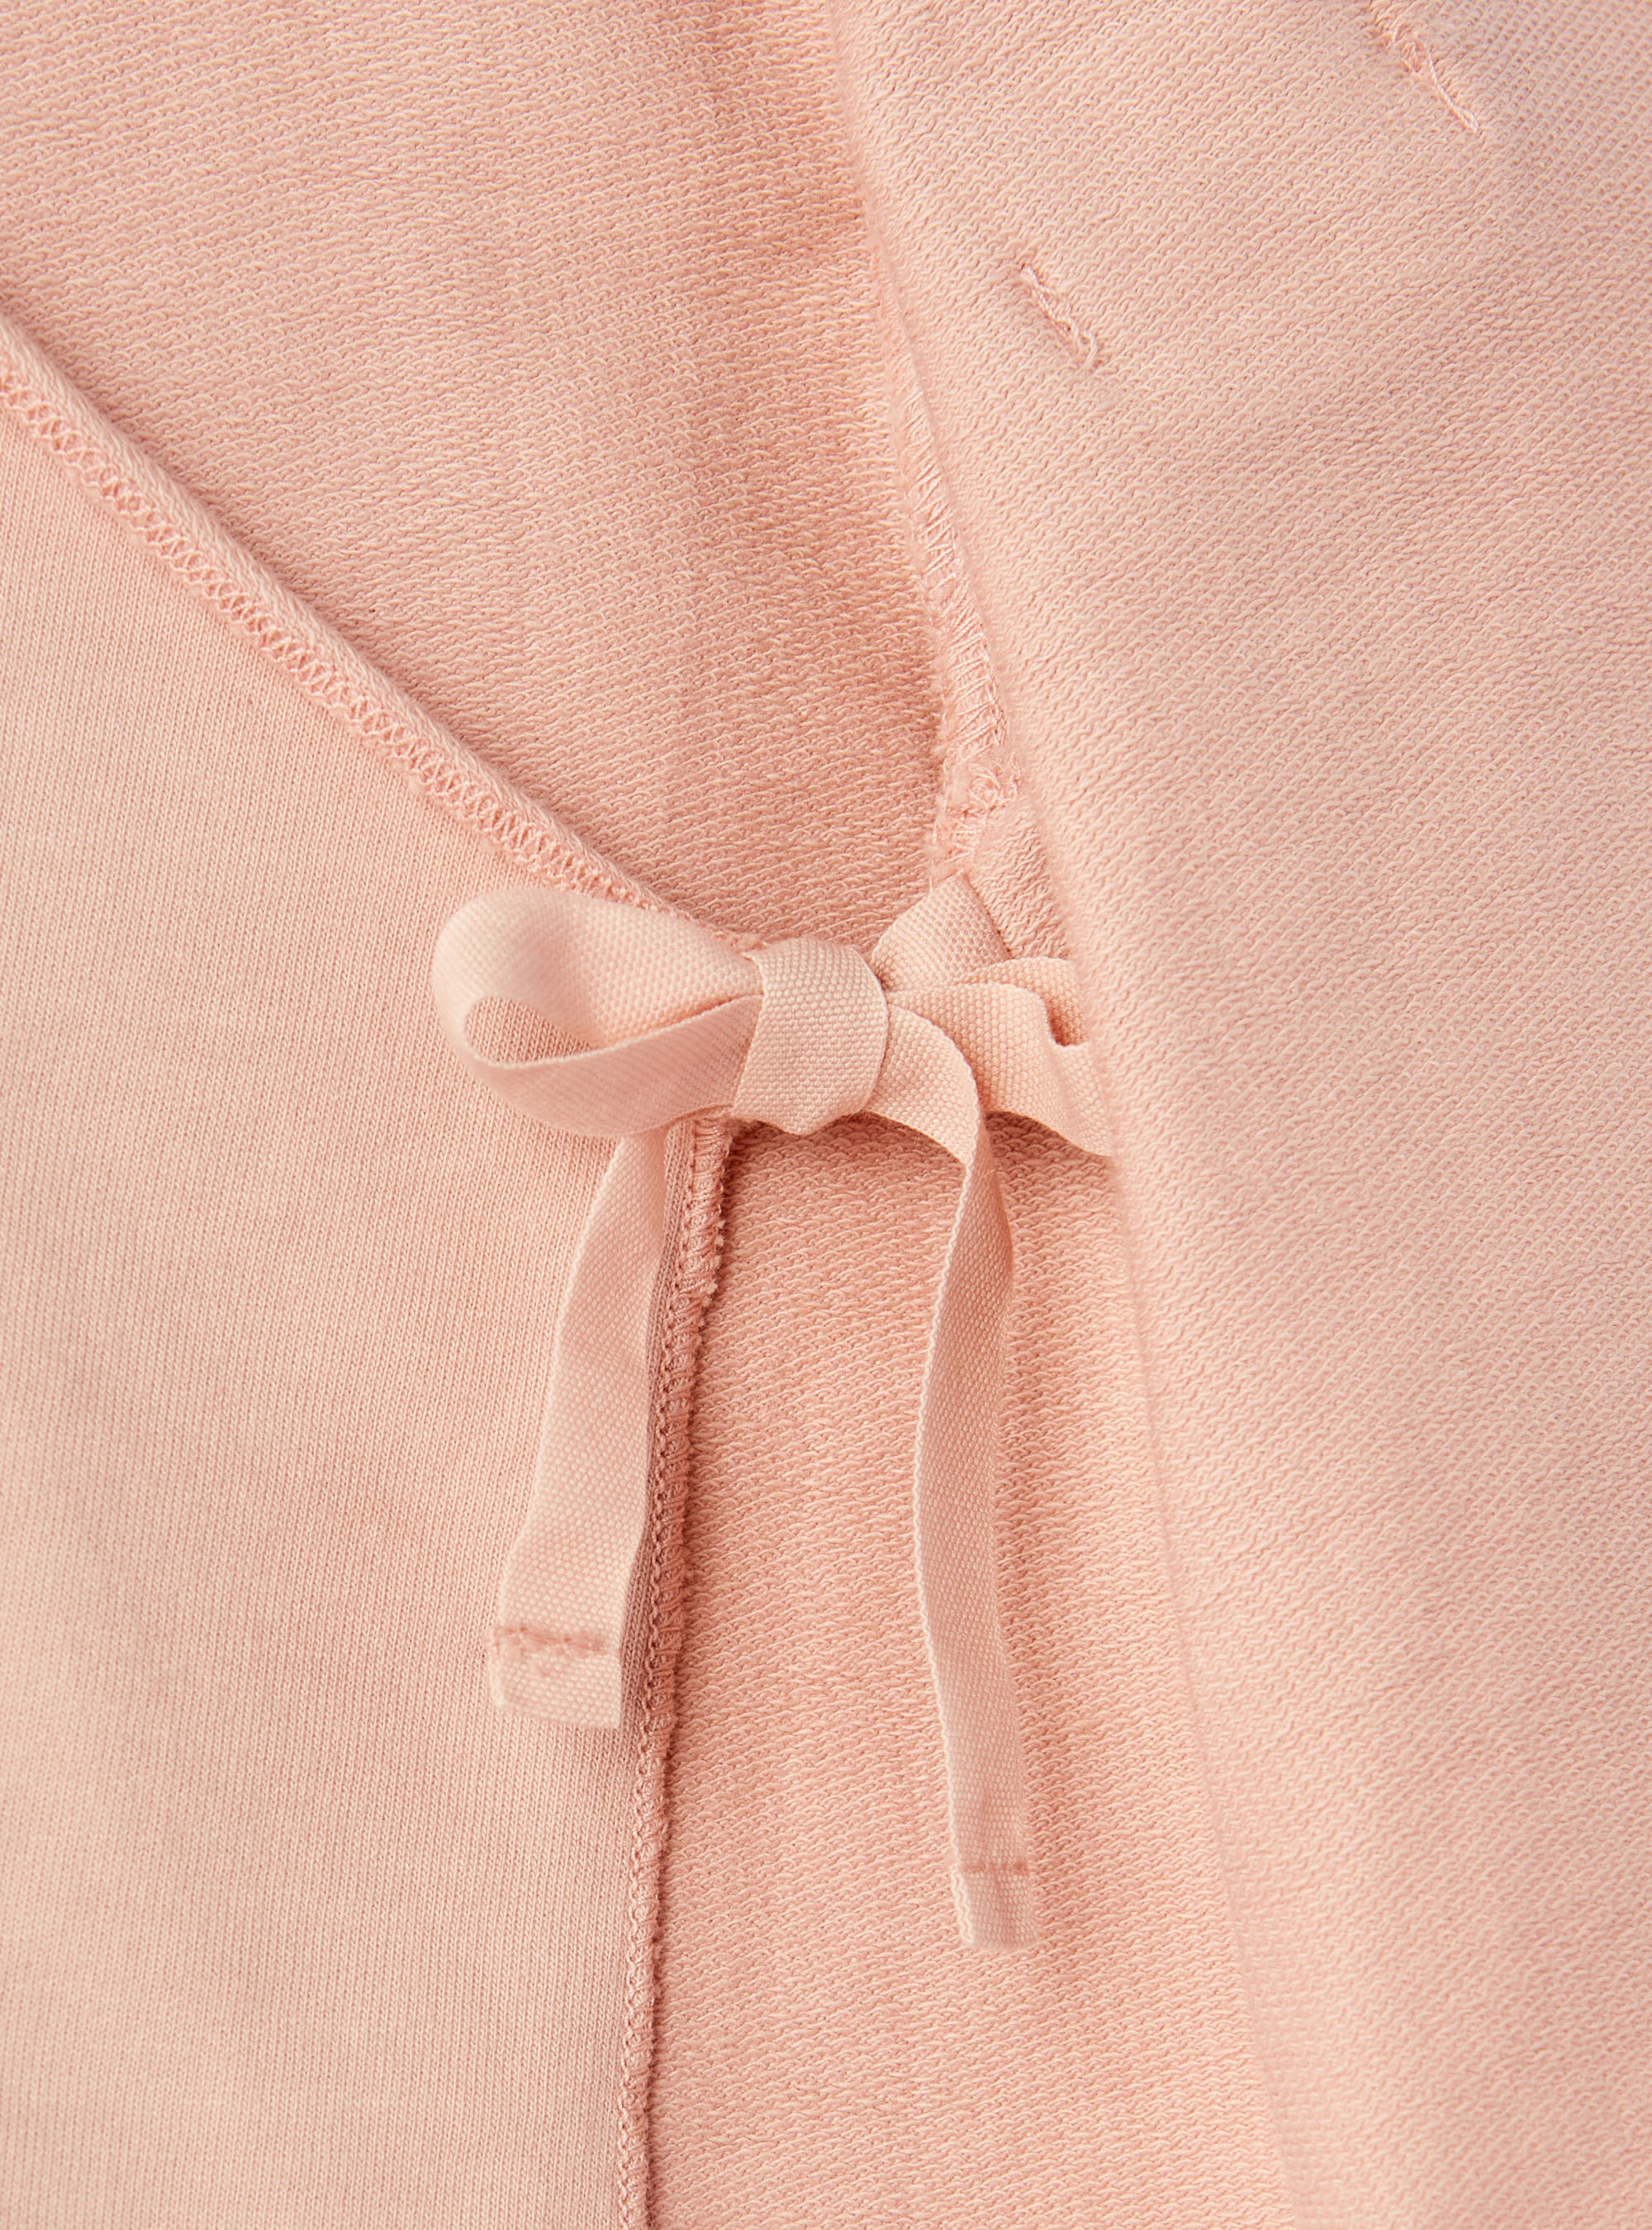 Pink fleece two-piece suit - Pink | Il Gufo